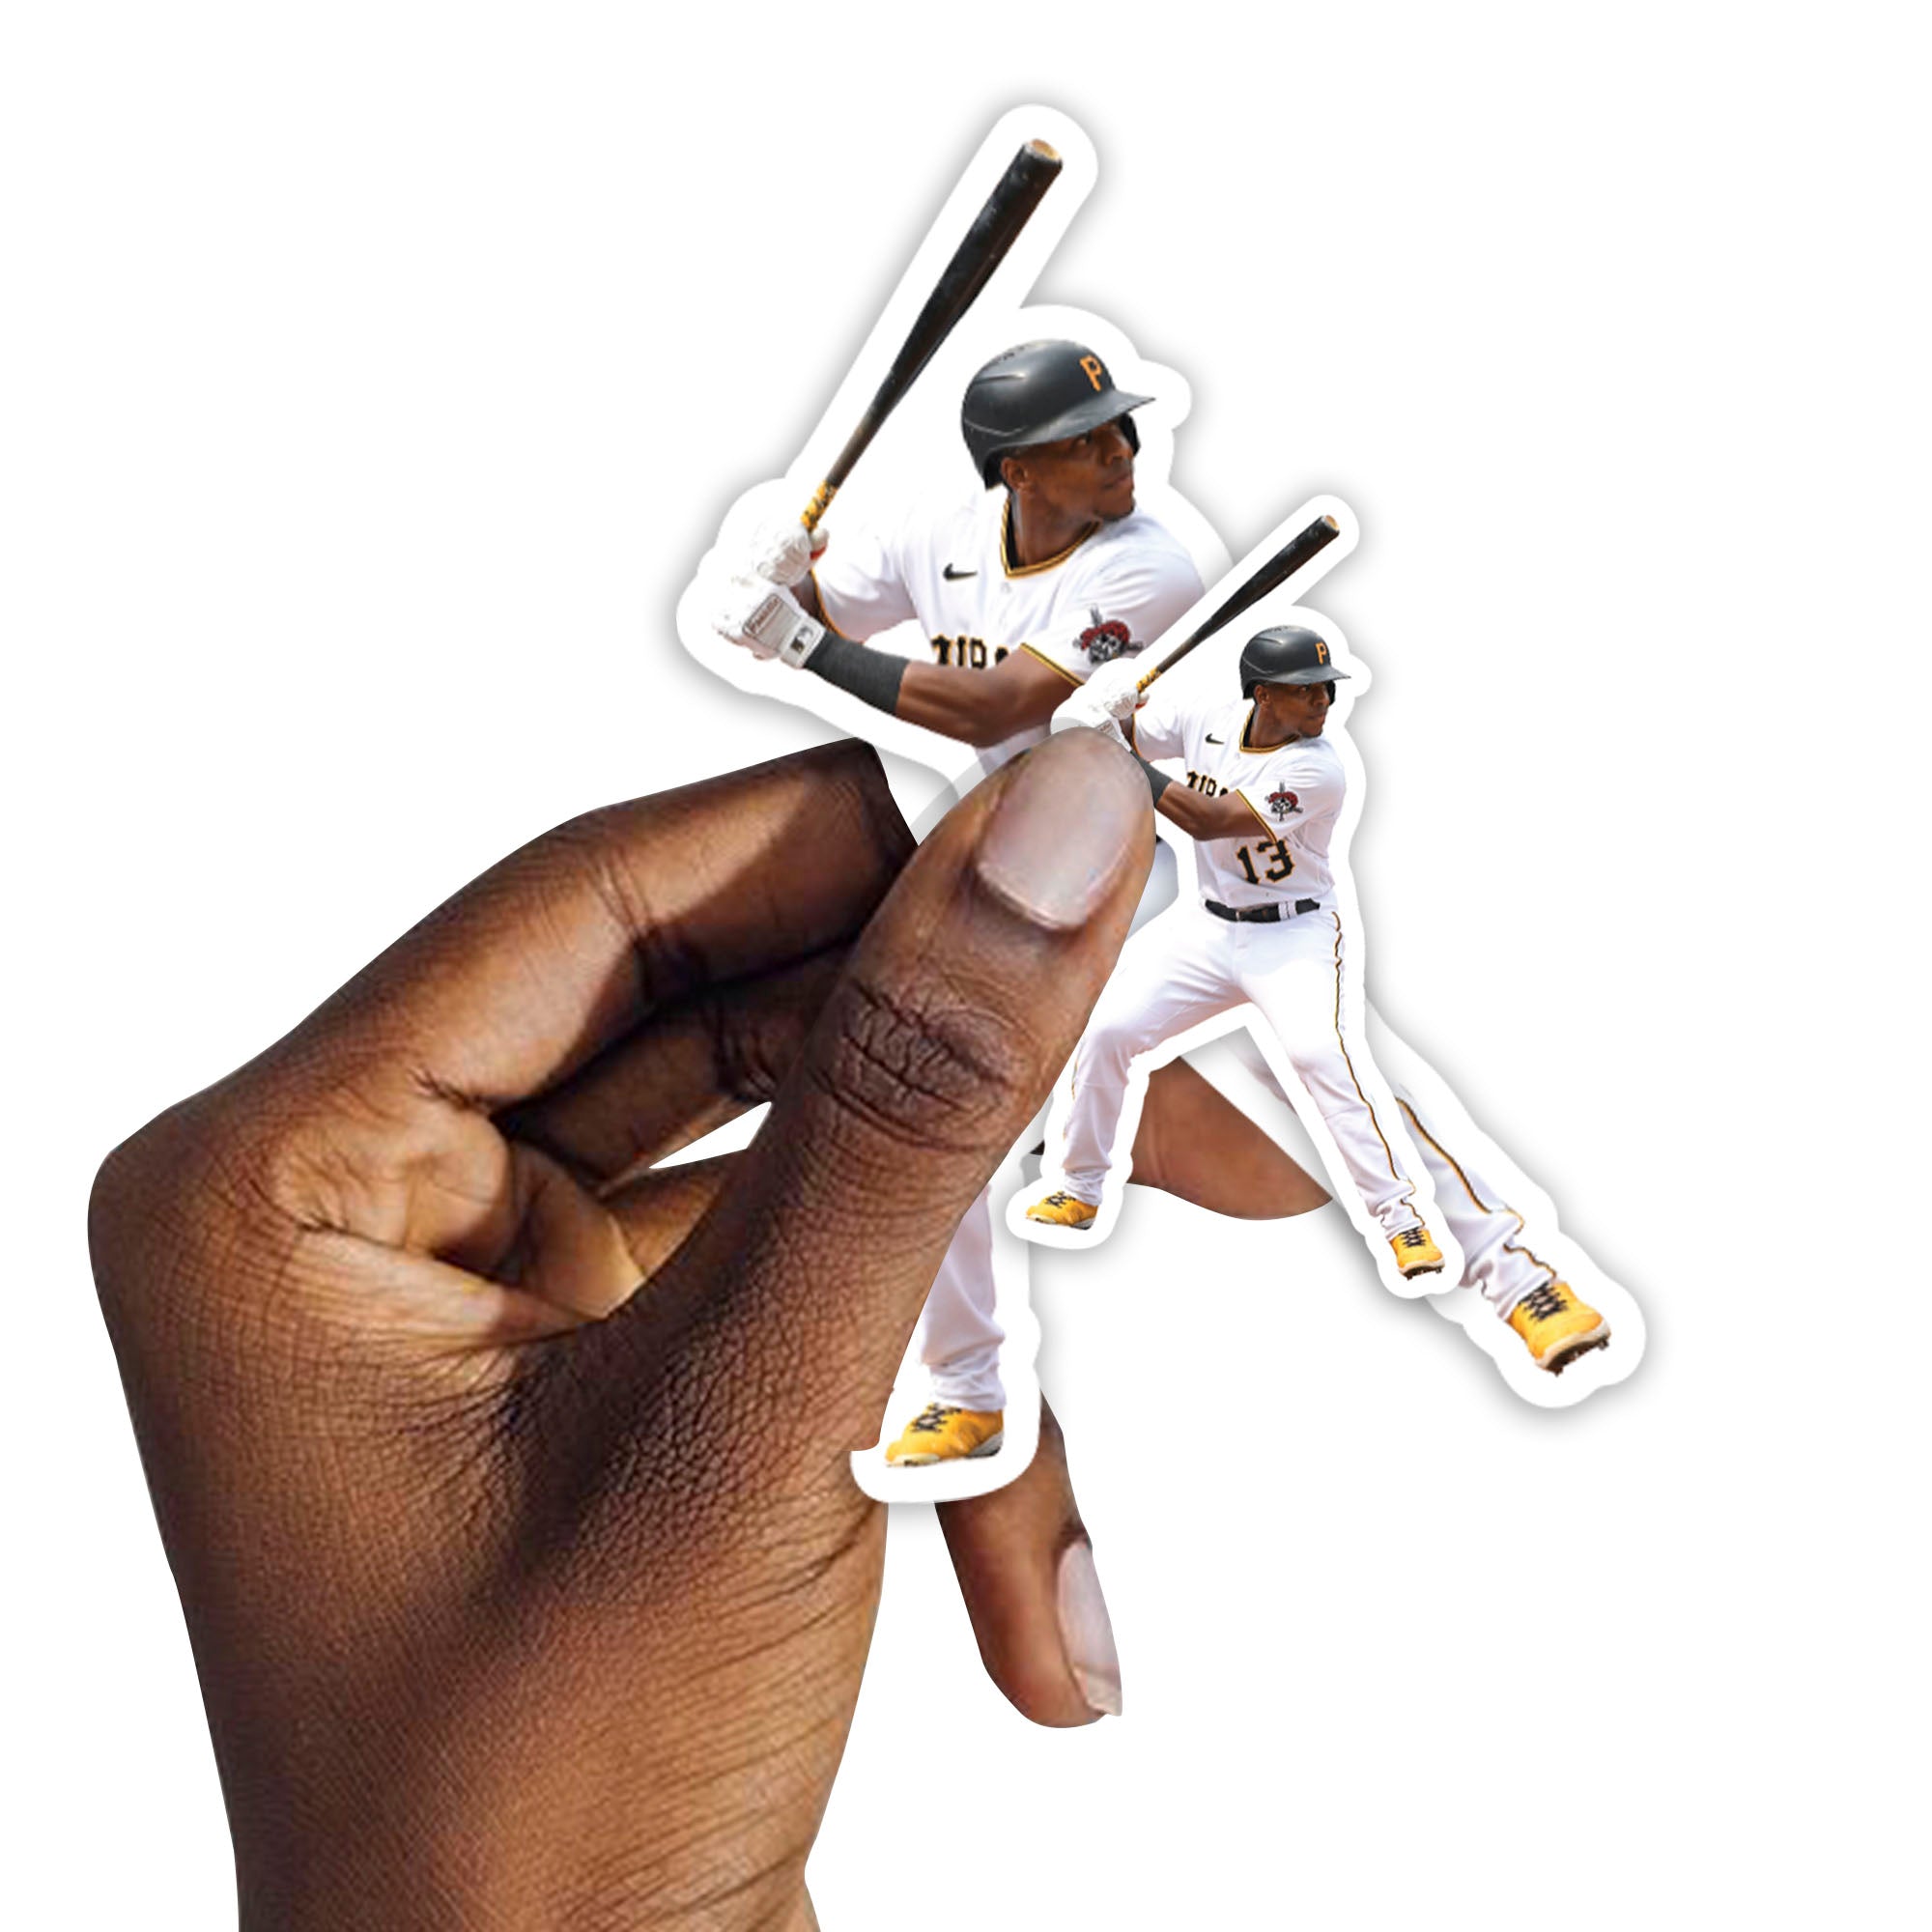 Pittsburgh Pirates: Ke'Bryan Hayes 2022 Poster - Officially Licensed M –  Fathead